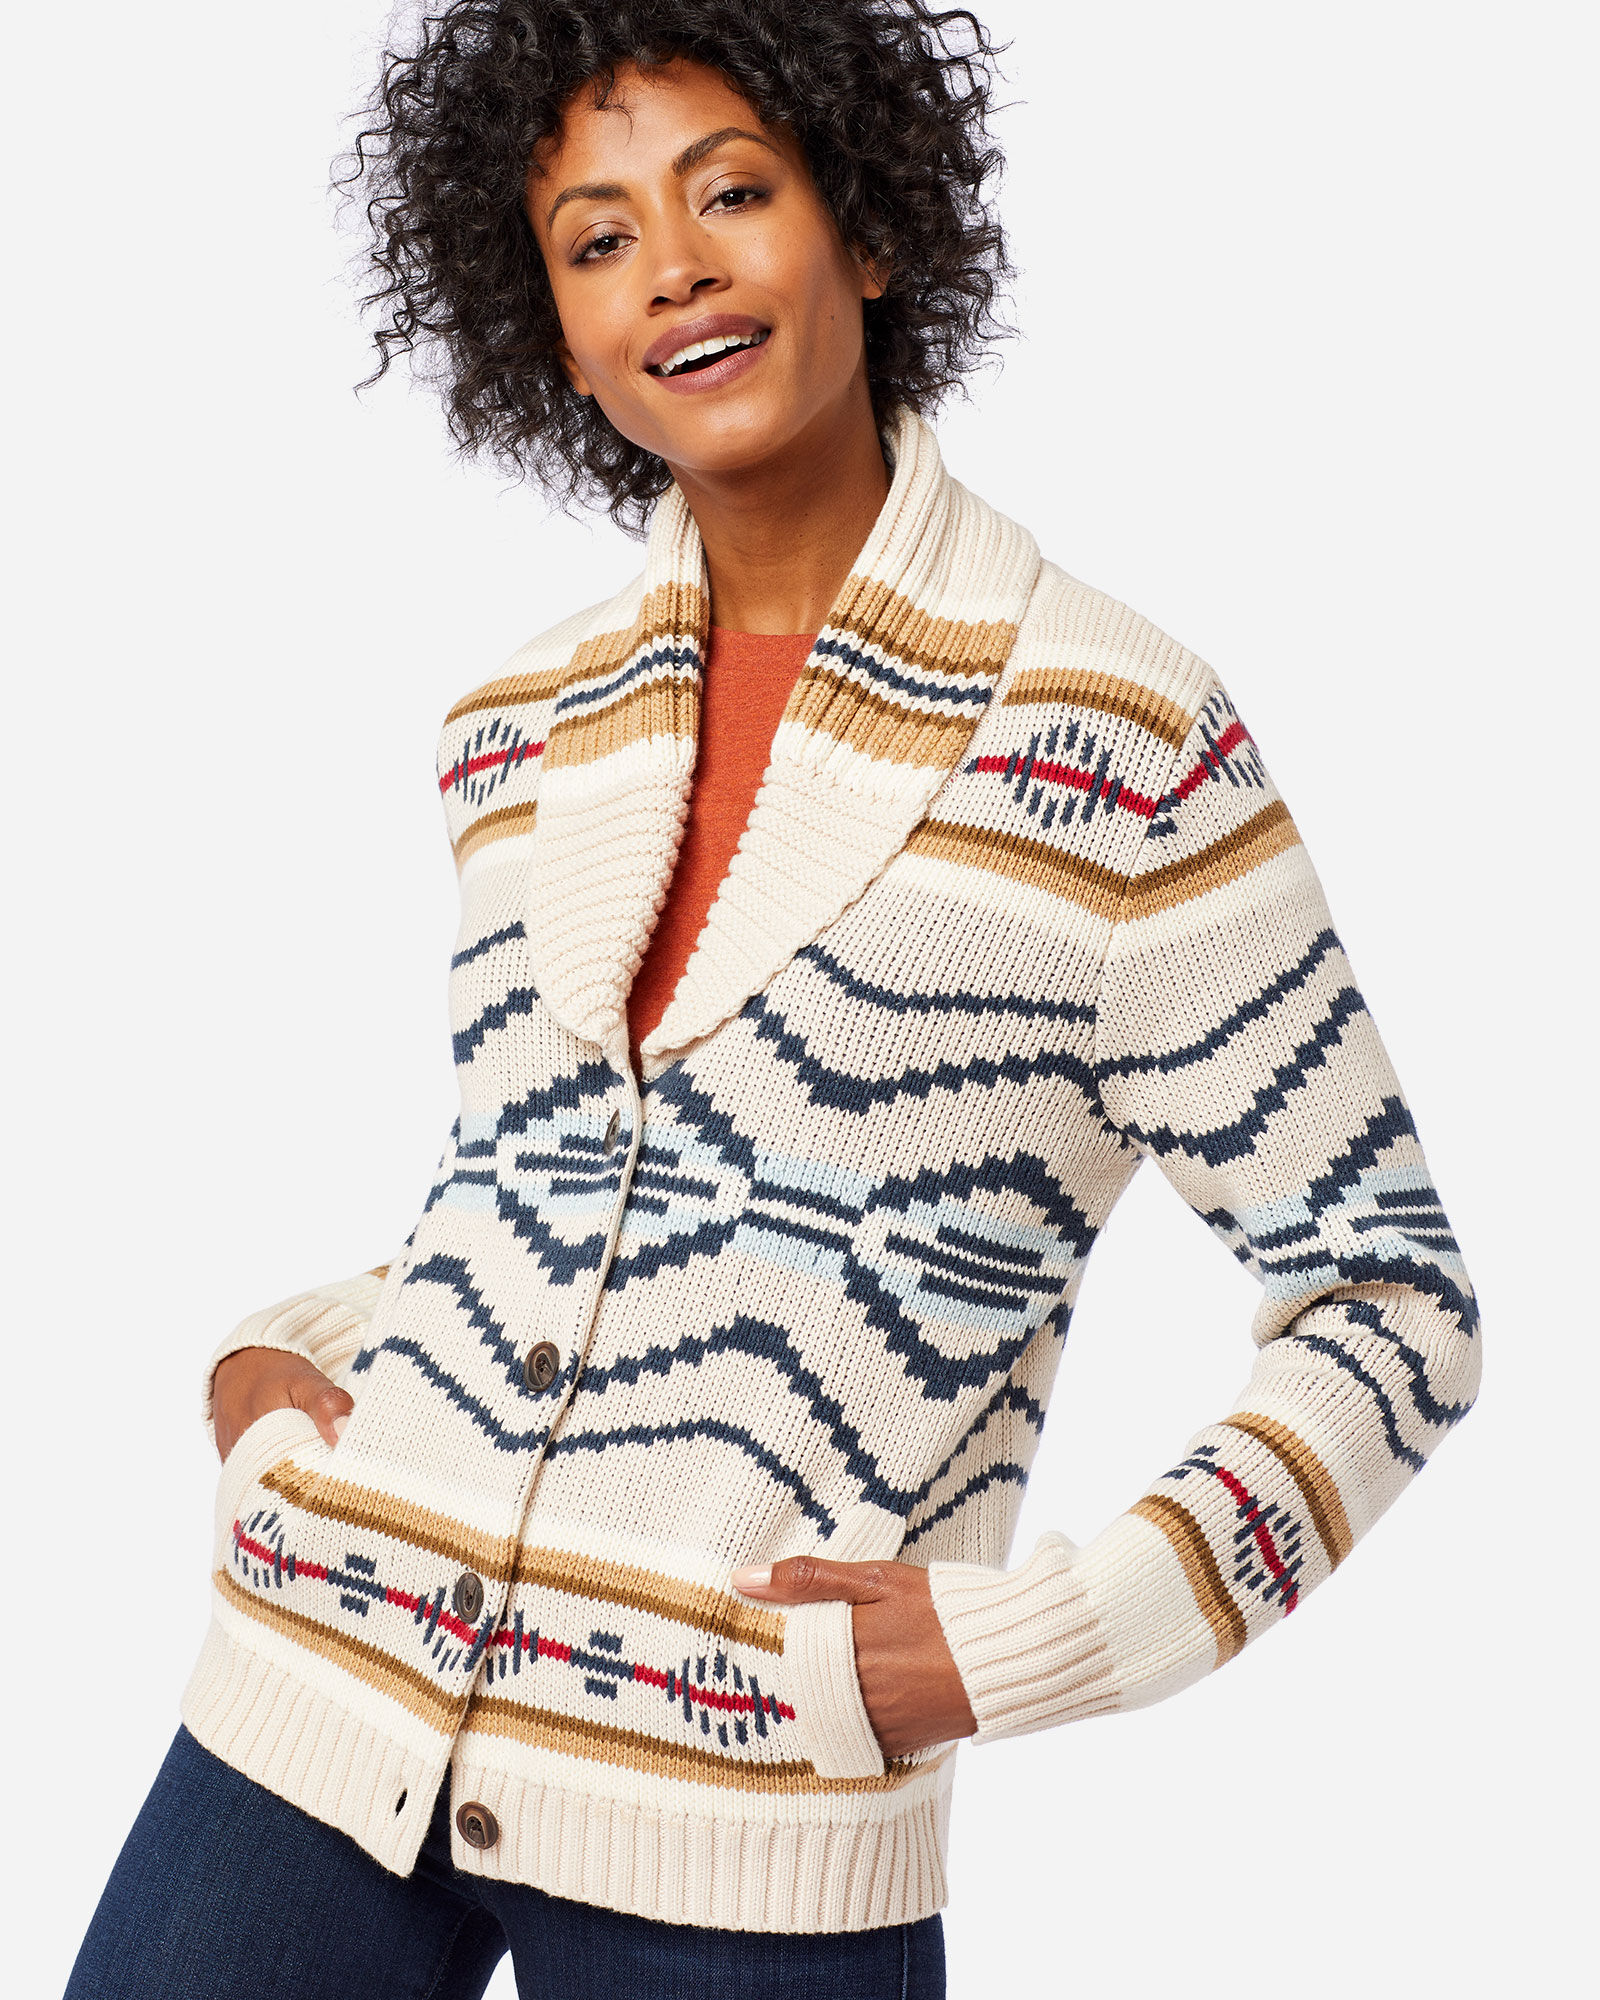 Pendleton Women's Currents Cardigan – C.M. Russell Museum